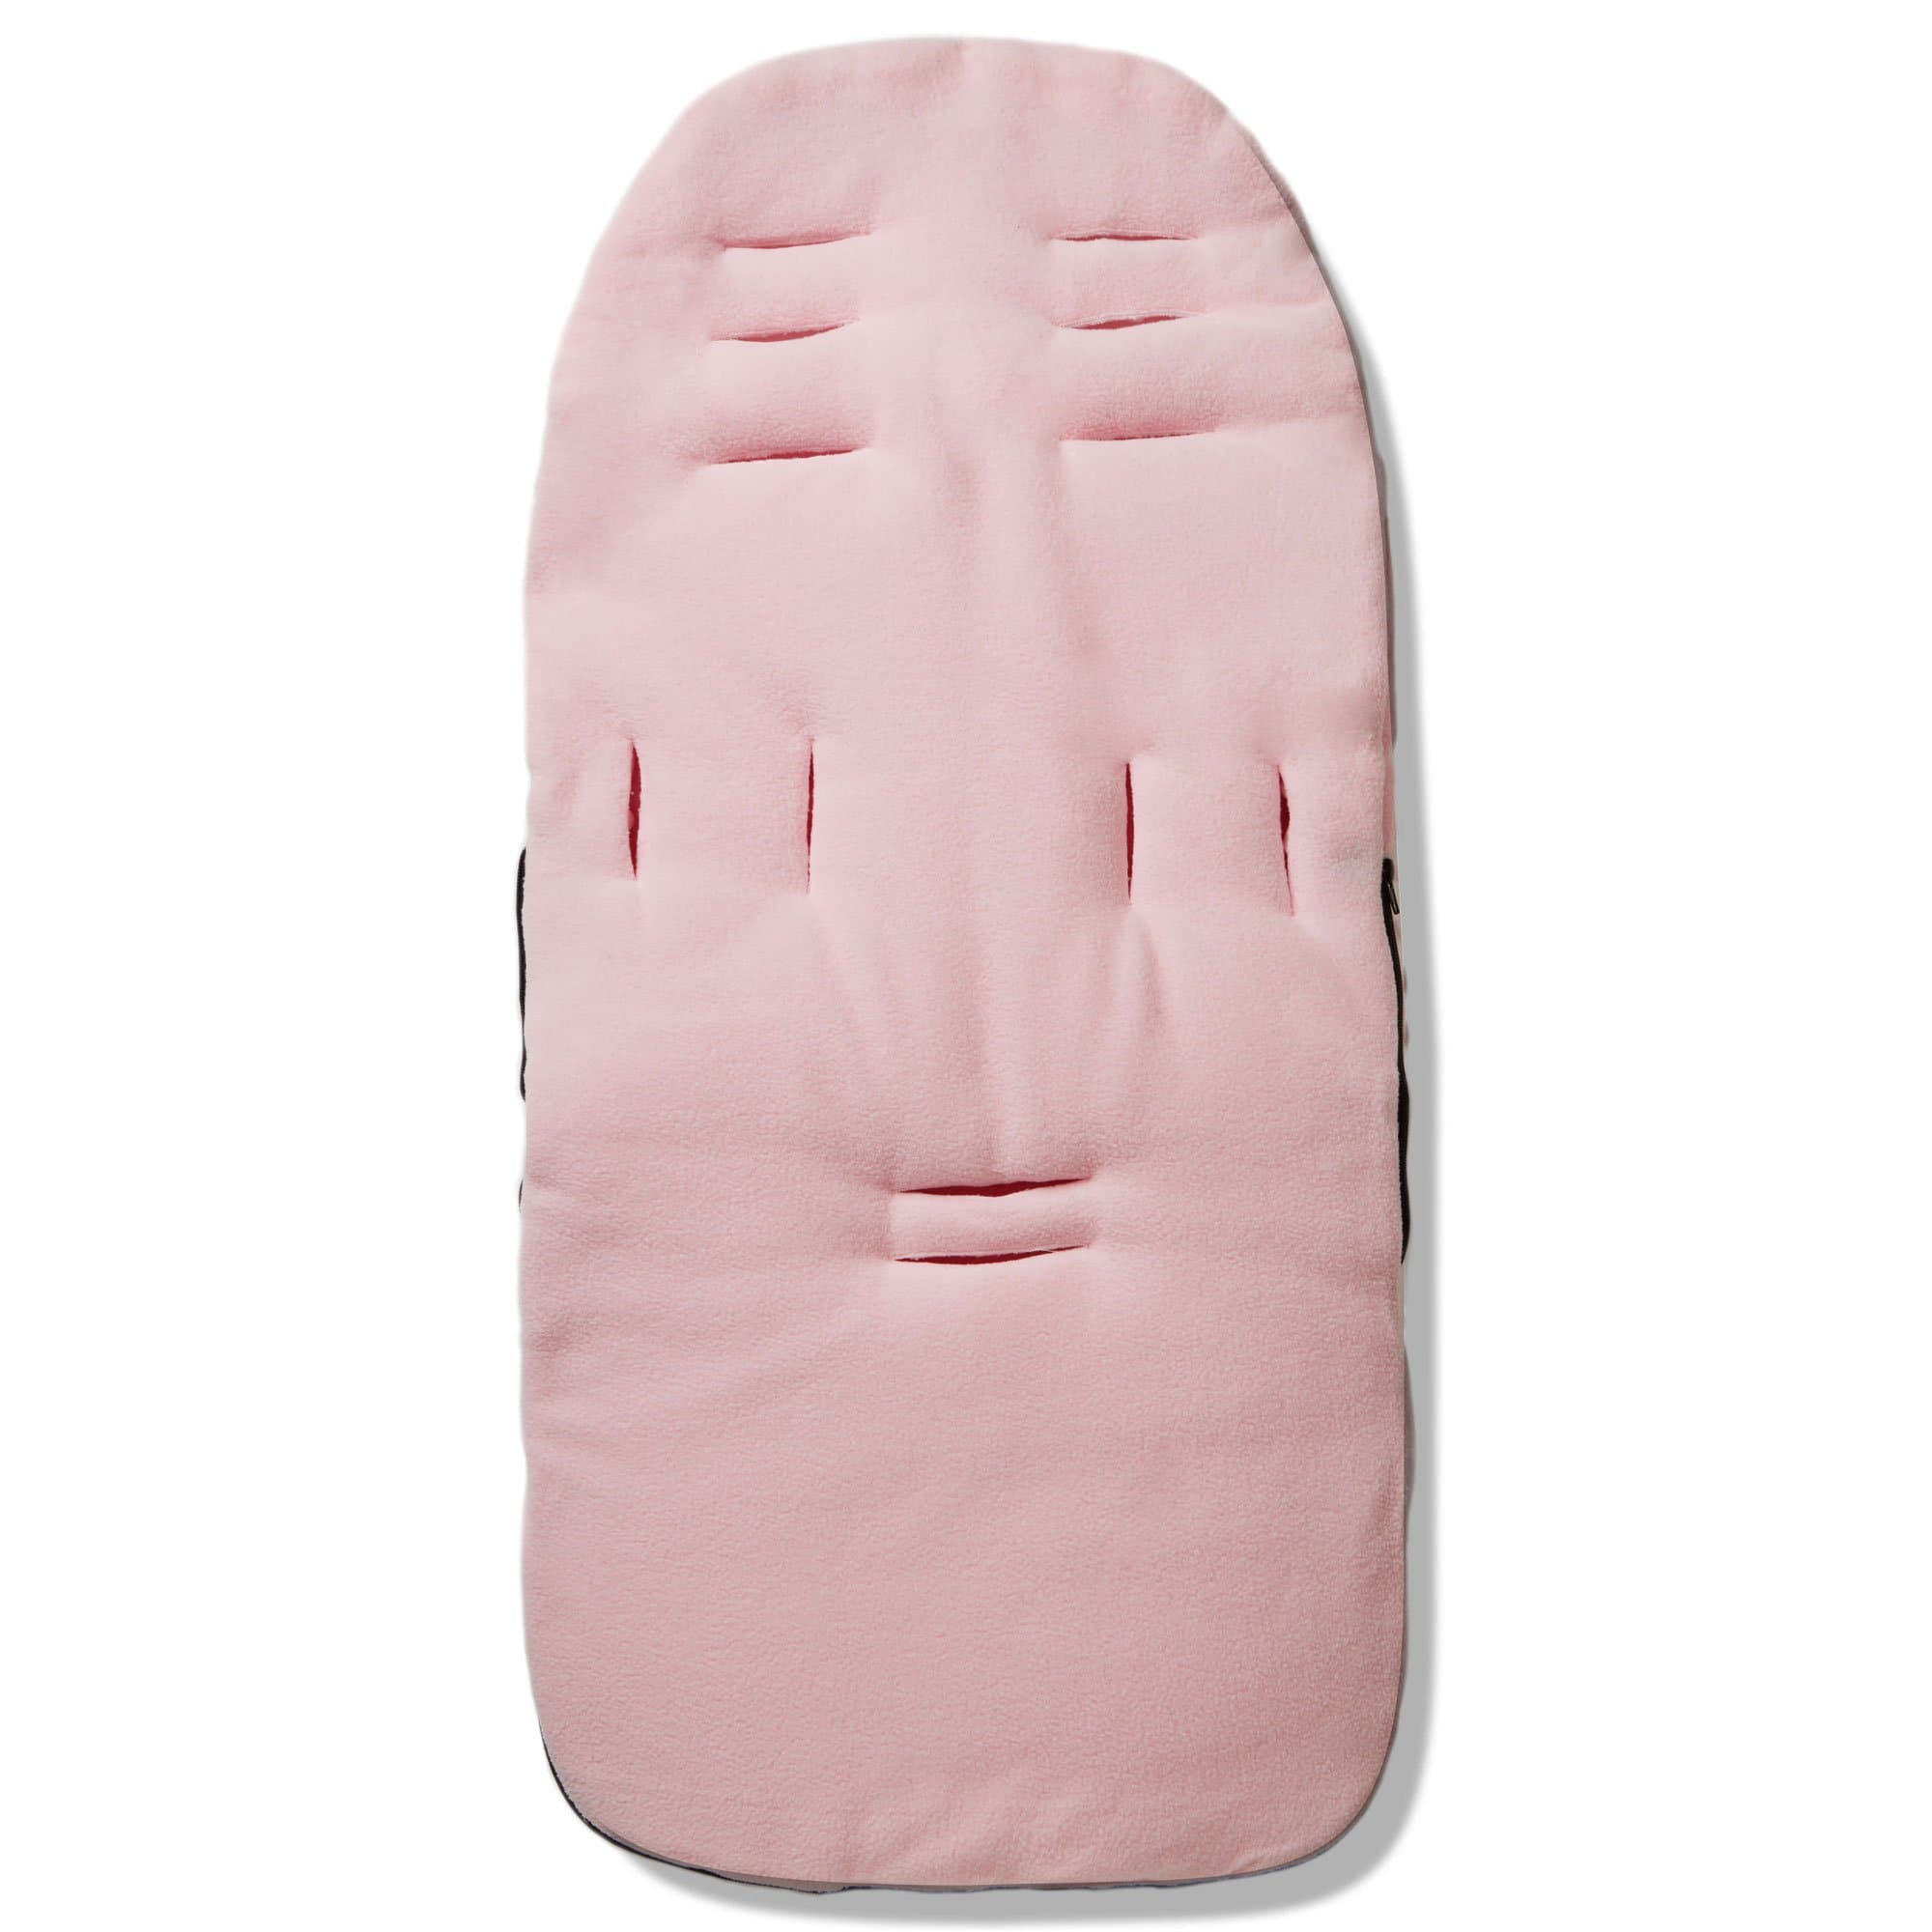 Dimple Footmuff / Cosy Toes Compatible with Combi - For Your Little One